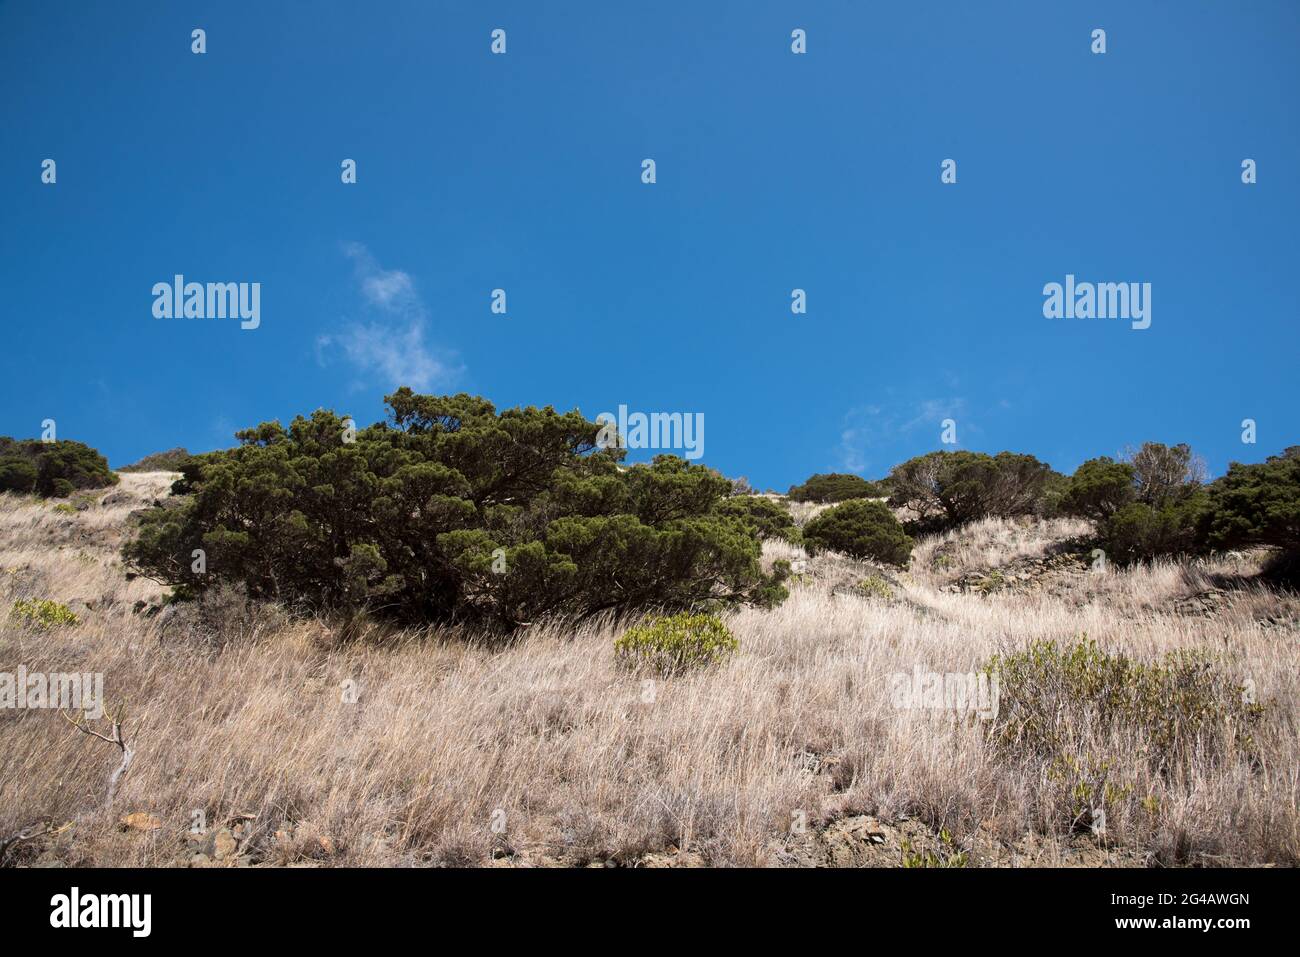 Canary Islands juniper is an endemic and endangered species to the western Canary Islands and Madeira growing here on La Gomera. Stock Photo